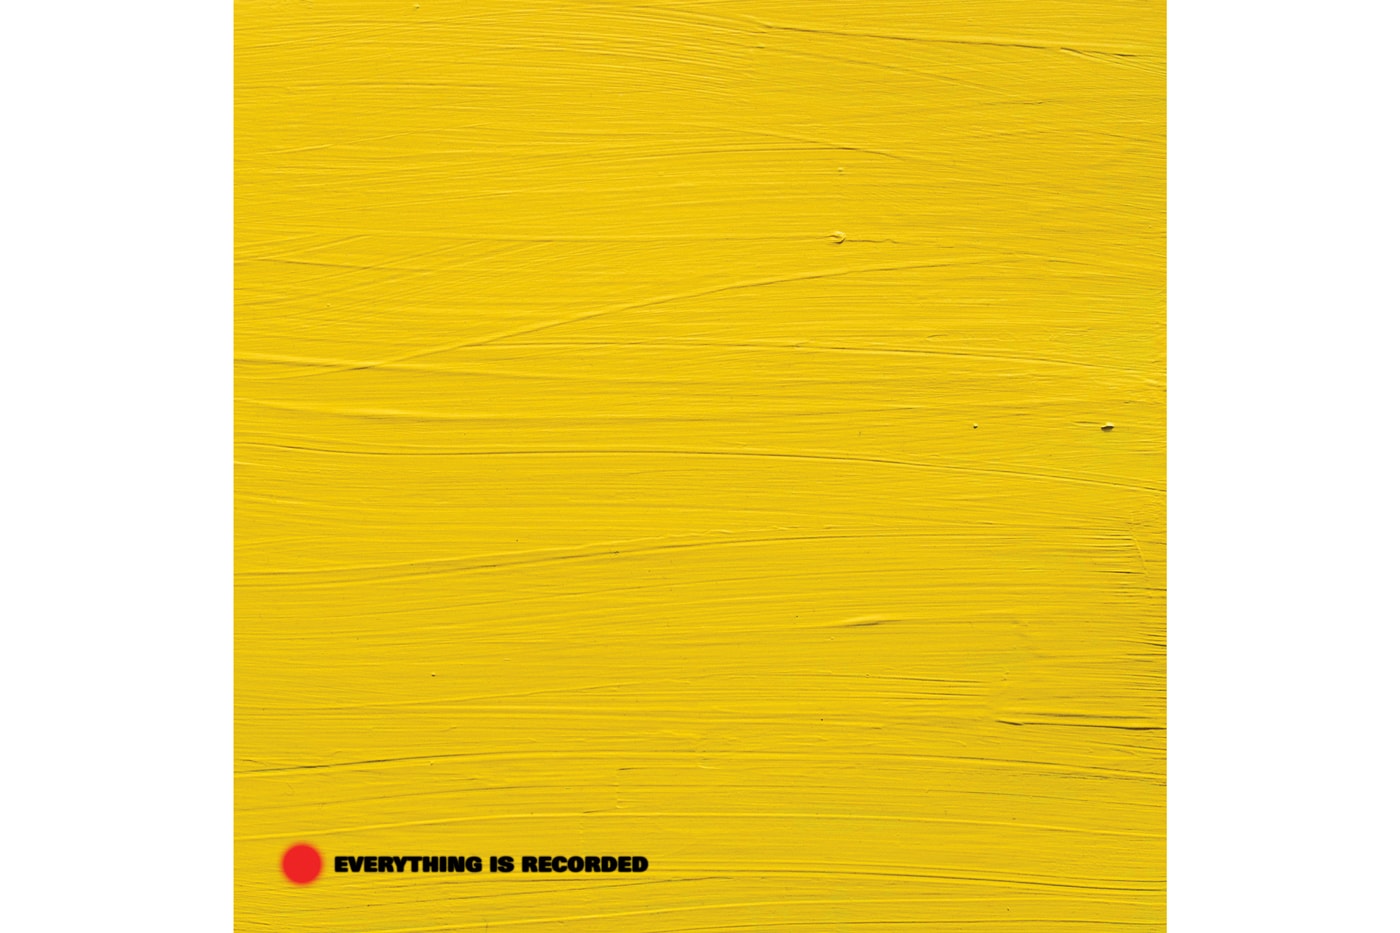 Everything Is Recorded Album Stream 2018 february 16 release date info richard russell xl recordings sampha syd itunes apple music